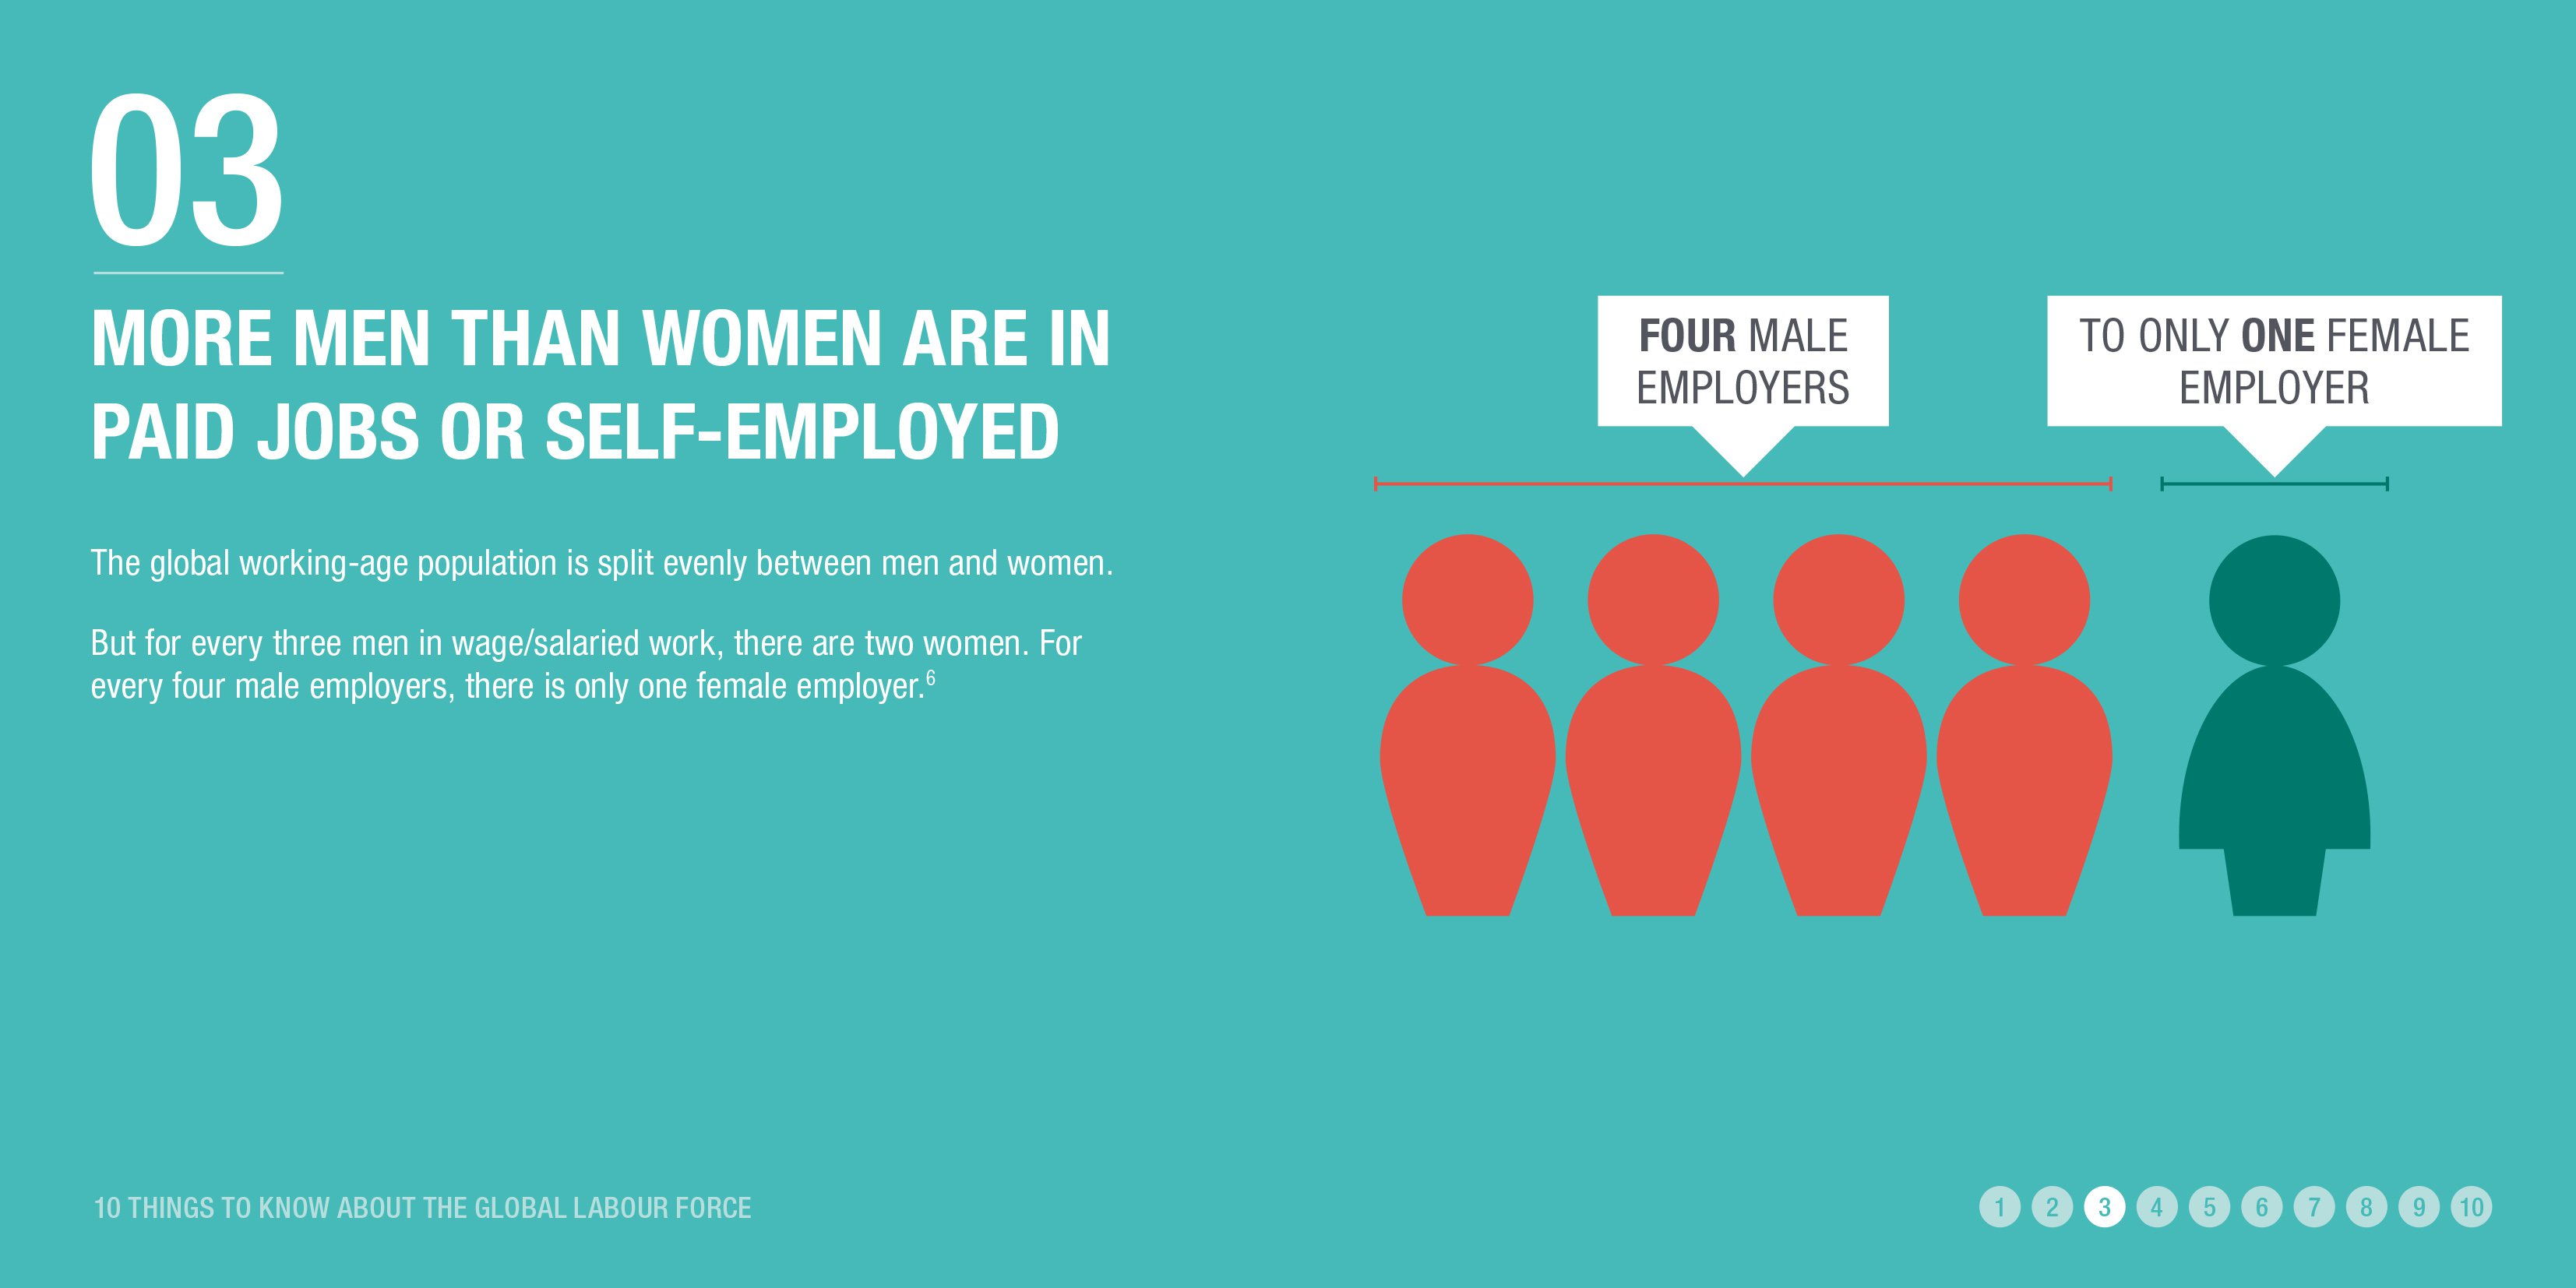 More men than women are in paid jobs or self-employed